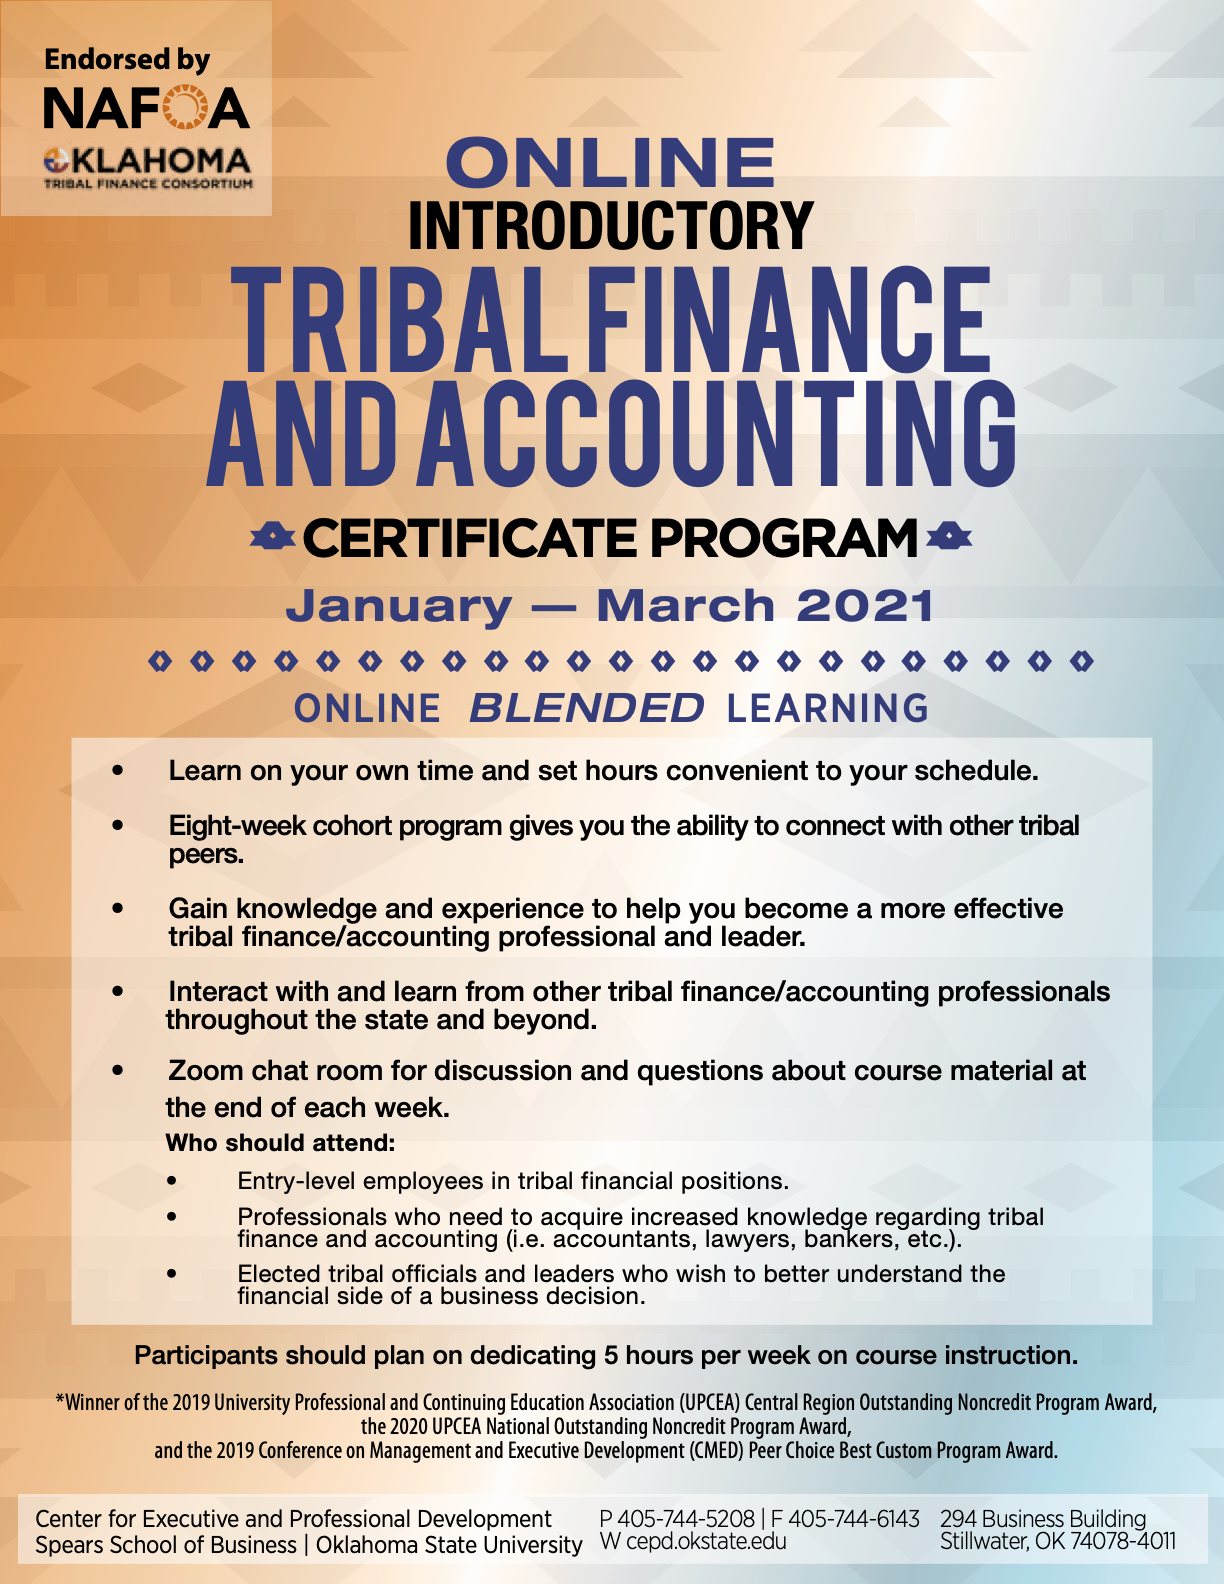 Online Introductory Tribal Finance and Accounting Certificate Program Agenda - Click for More